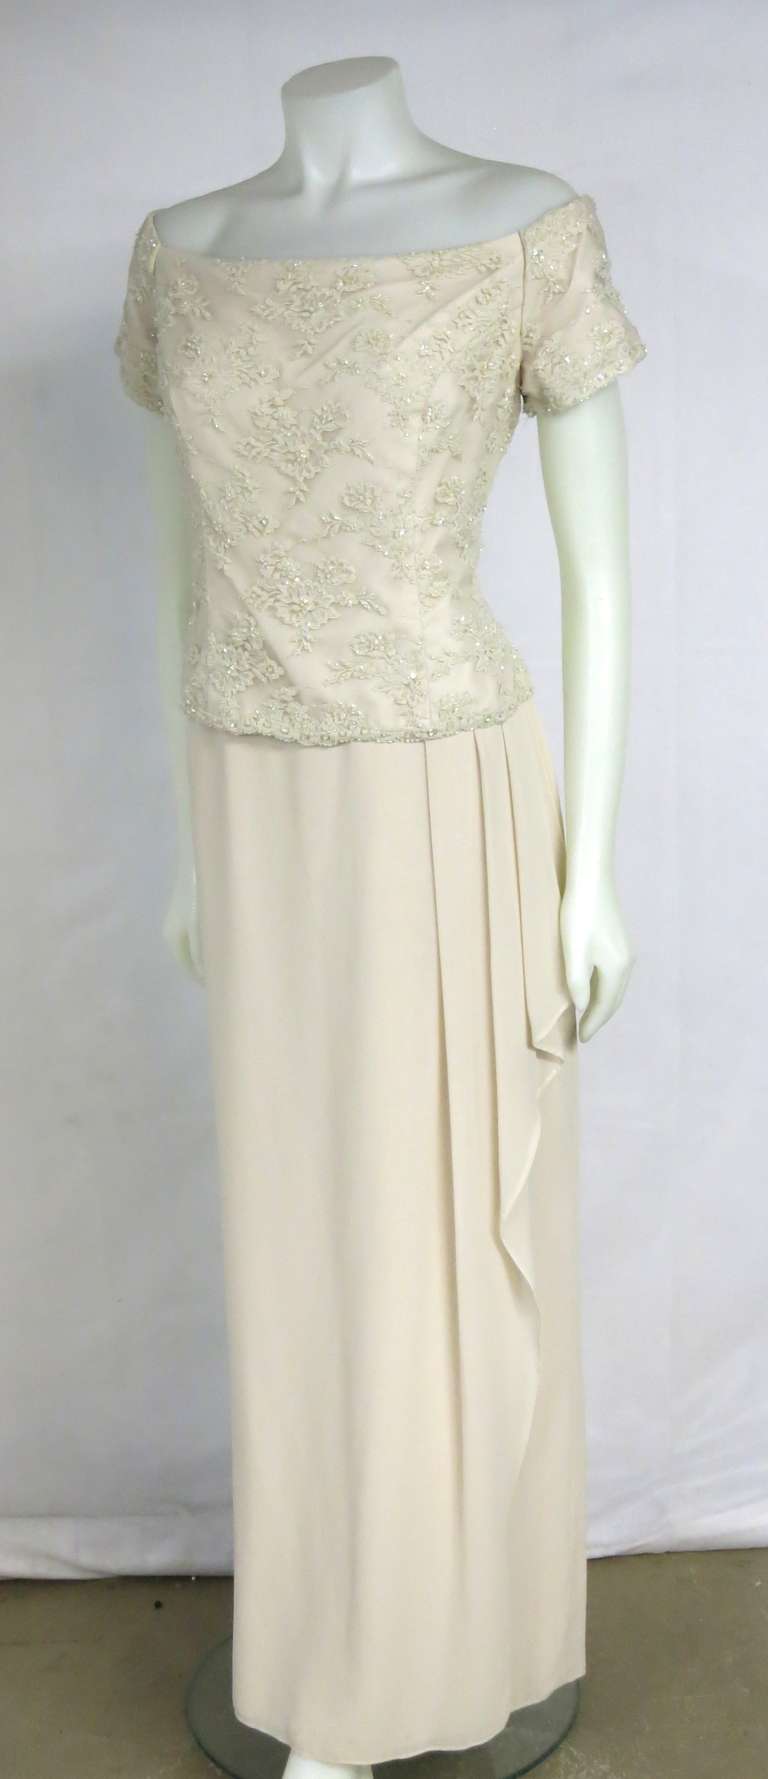 1990s Cream Blush  Beaded Lace Chiffon Side Sash Formal Mother of the Bride Dress..Fully Lined..Gentle sophistication! 

Bust: 38